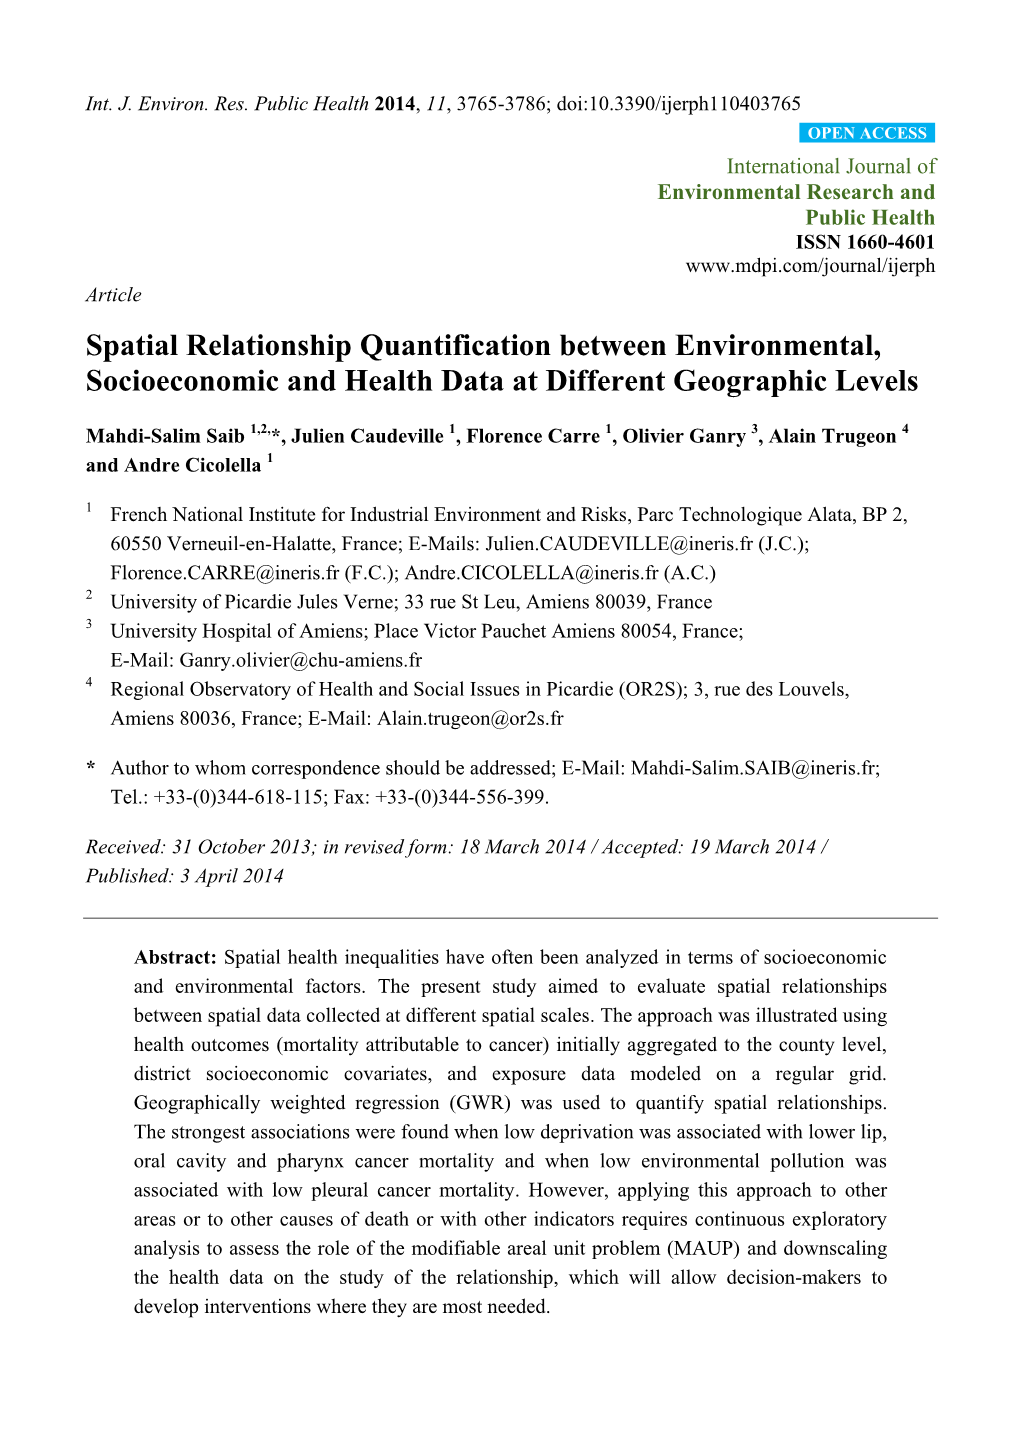 Spatial Relationship Quantification Between Environmental, Socioeconomic and Health Data at Different Geographic Levels